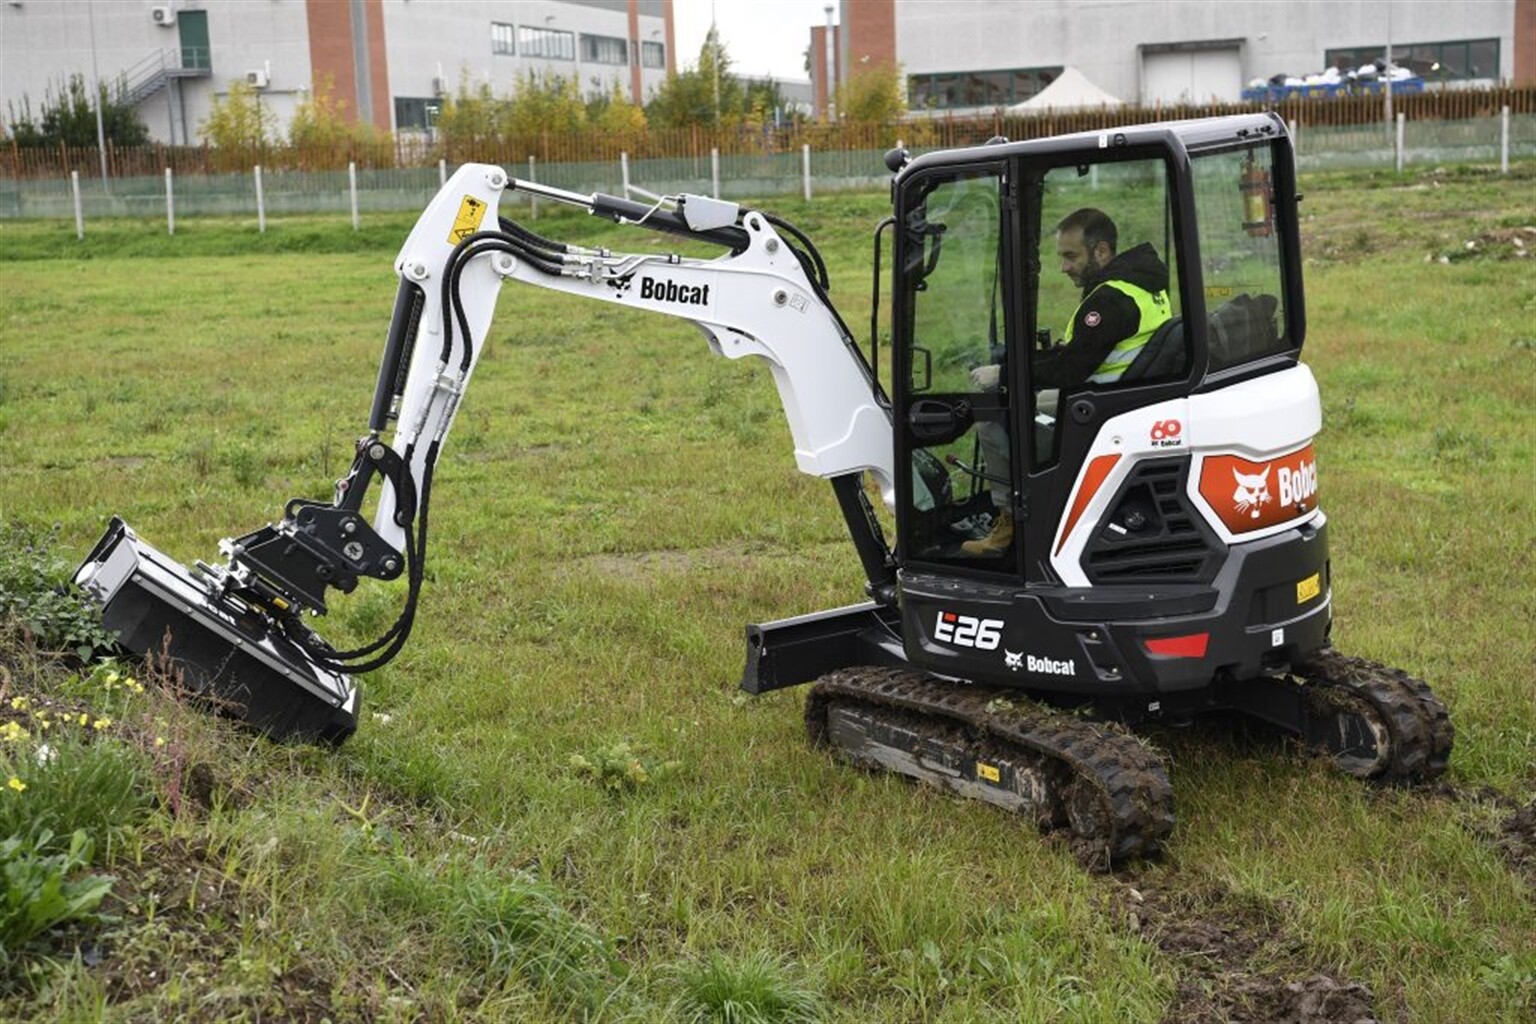 New Self-Levelling Flail Mowers for Bobcat Excavators